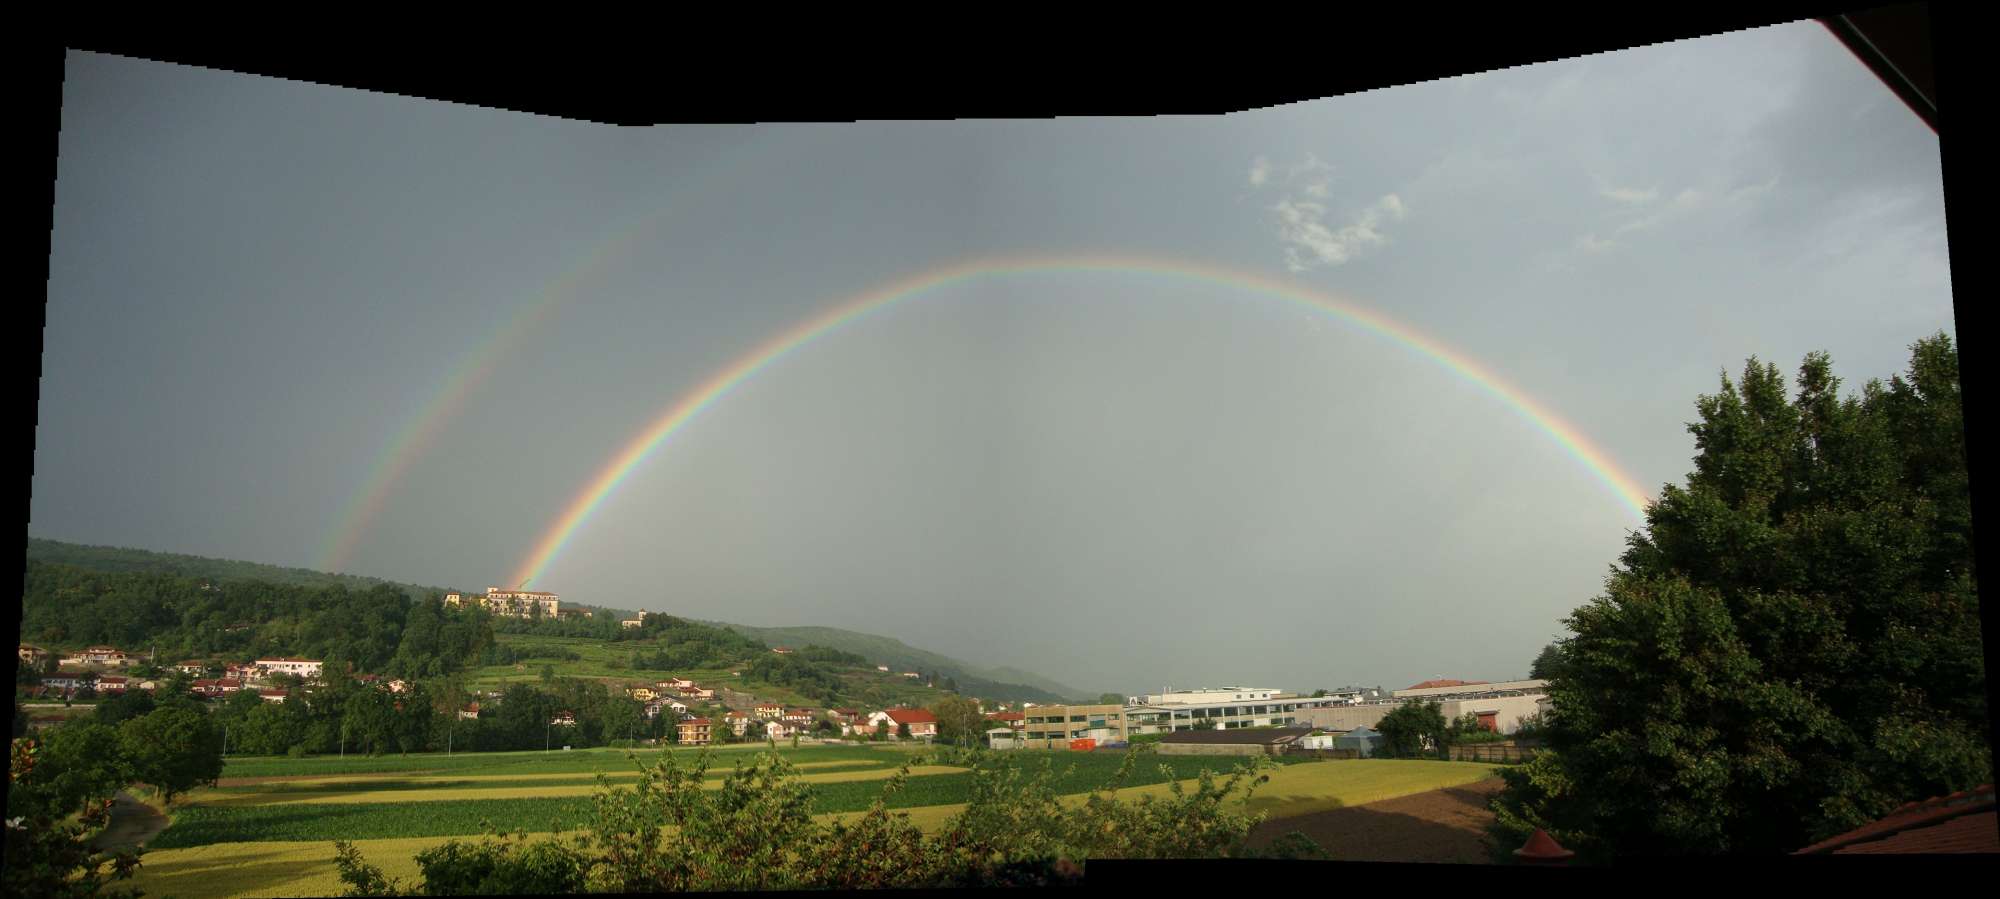 Double rainbow over Bollengo castle: 113 KB; click on the image to enlarge